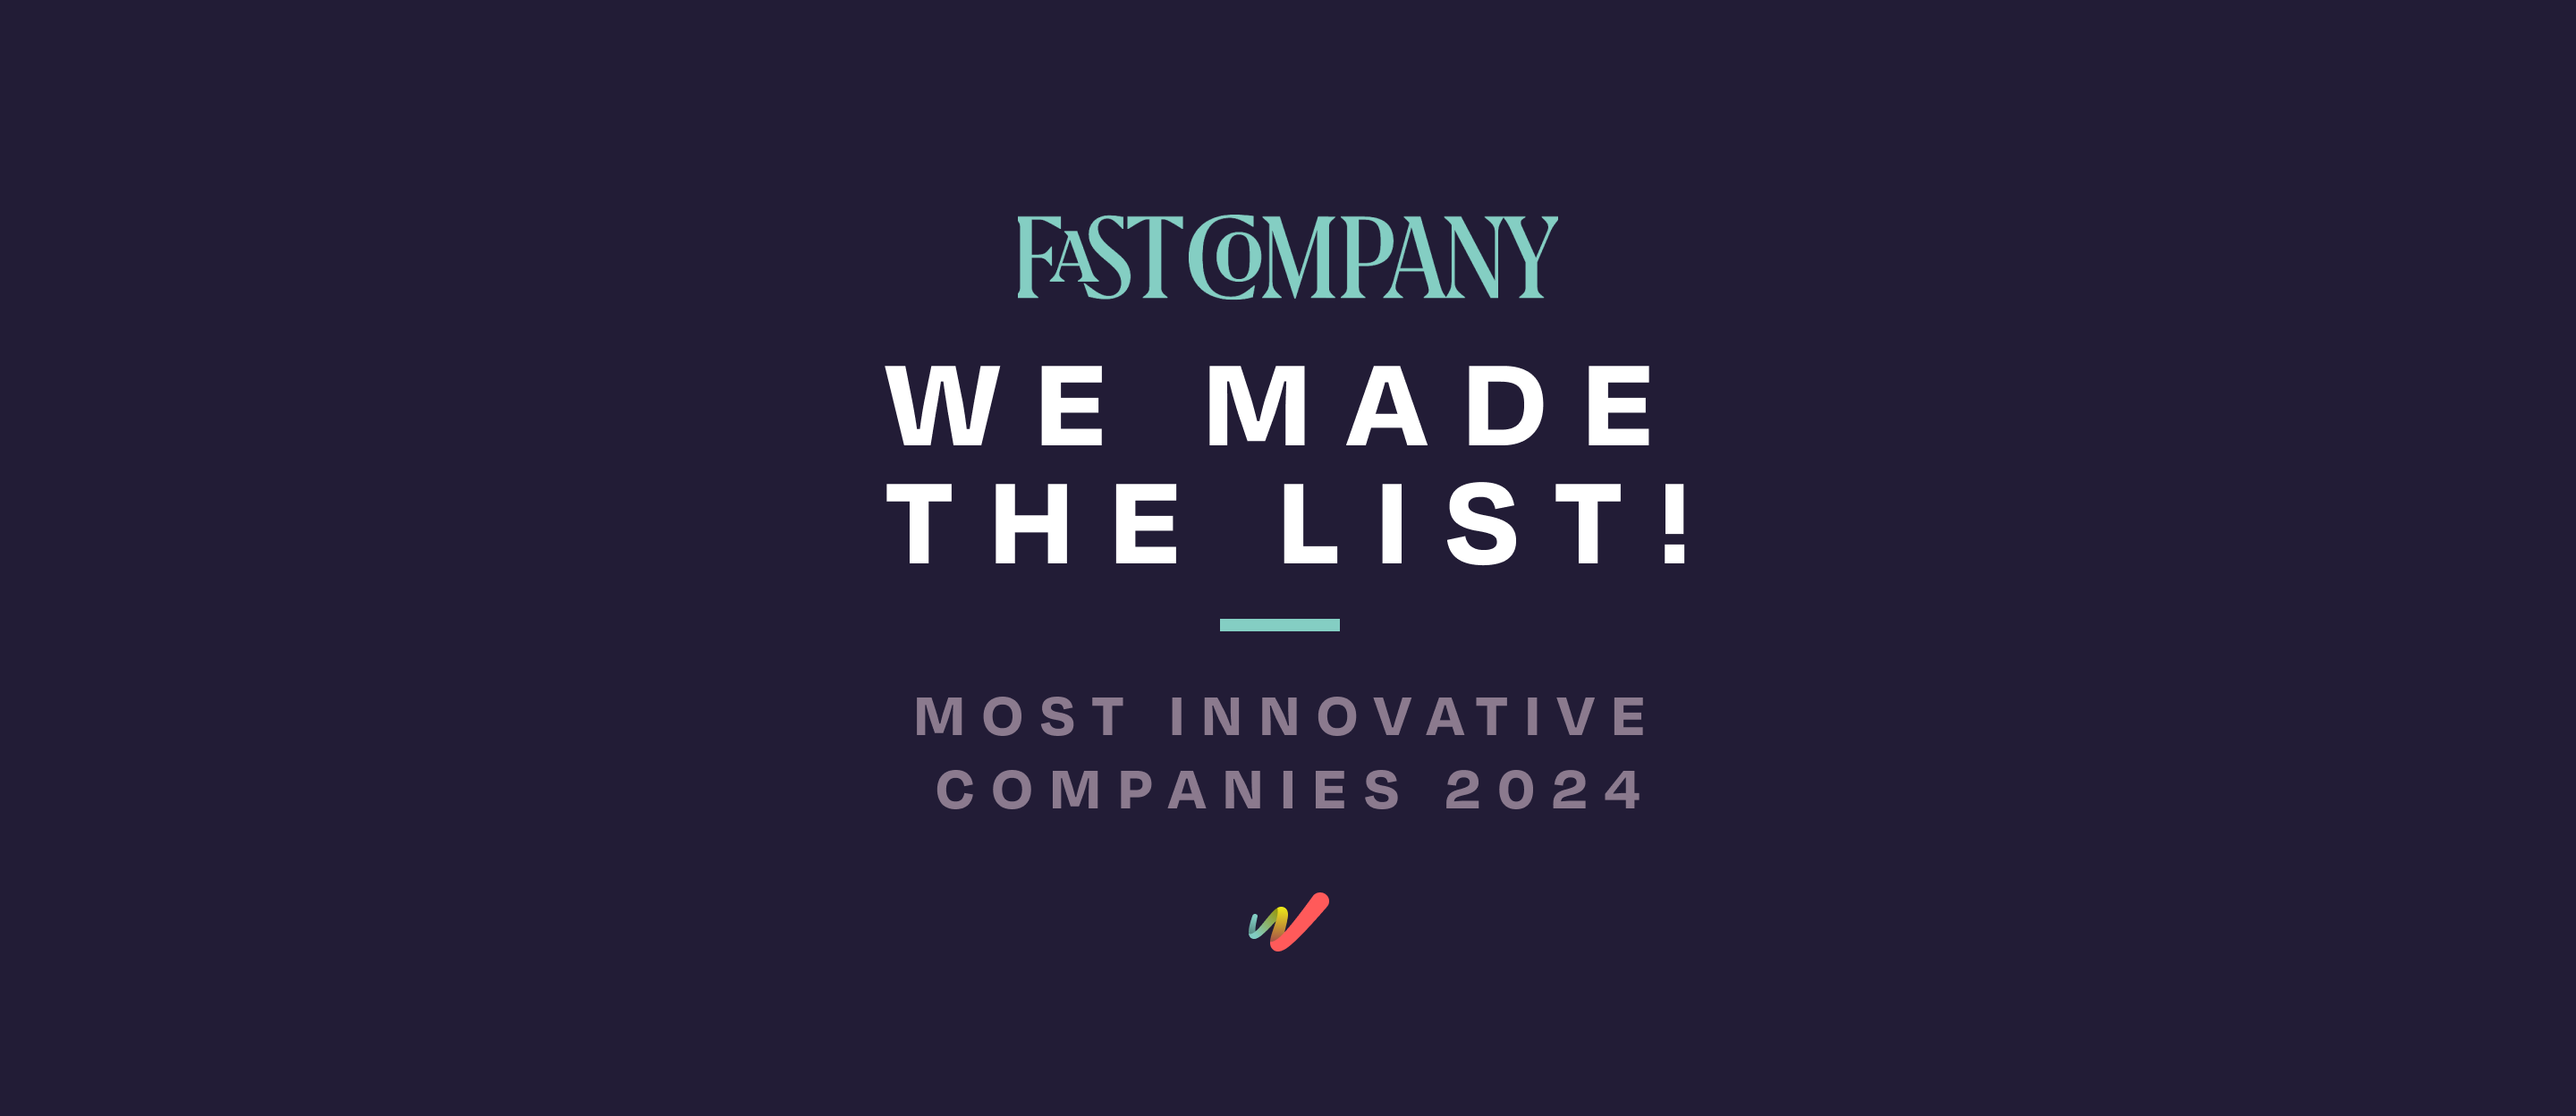 Workera Named Fast Company's Most Innovative Company for 2024: A Milestone in AI & Skills Technology